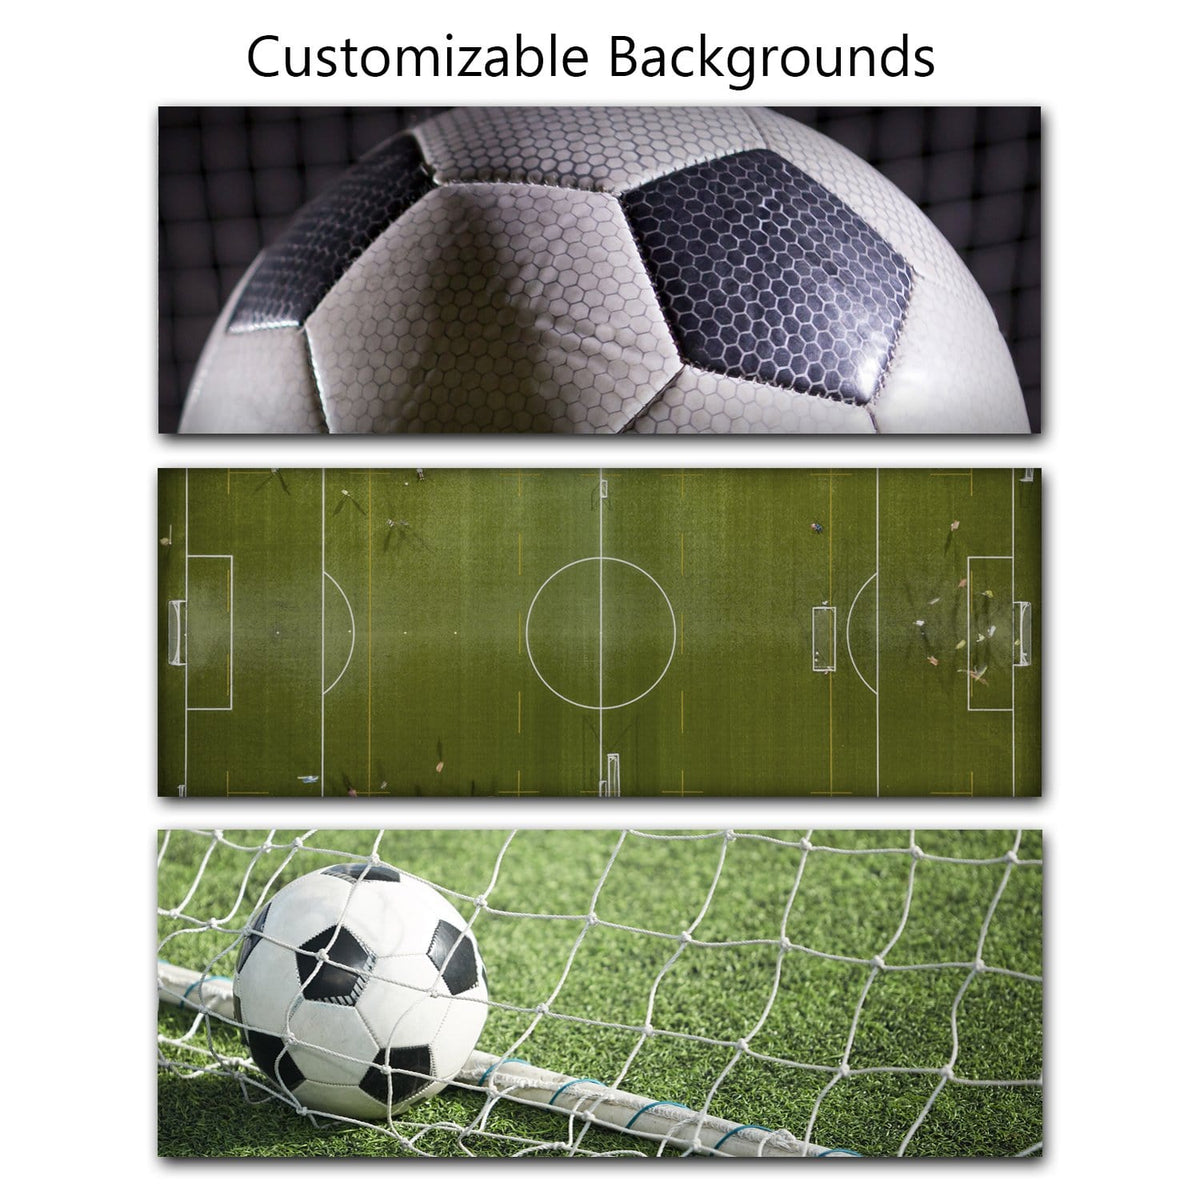 Try out different soccer backgrounds when customizing your name art